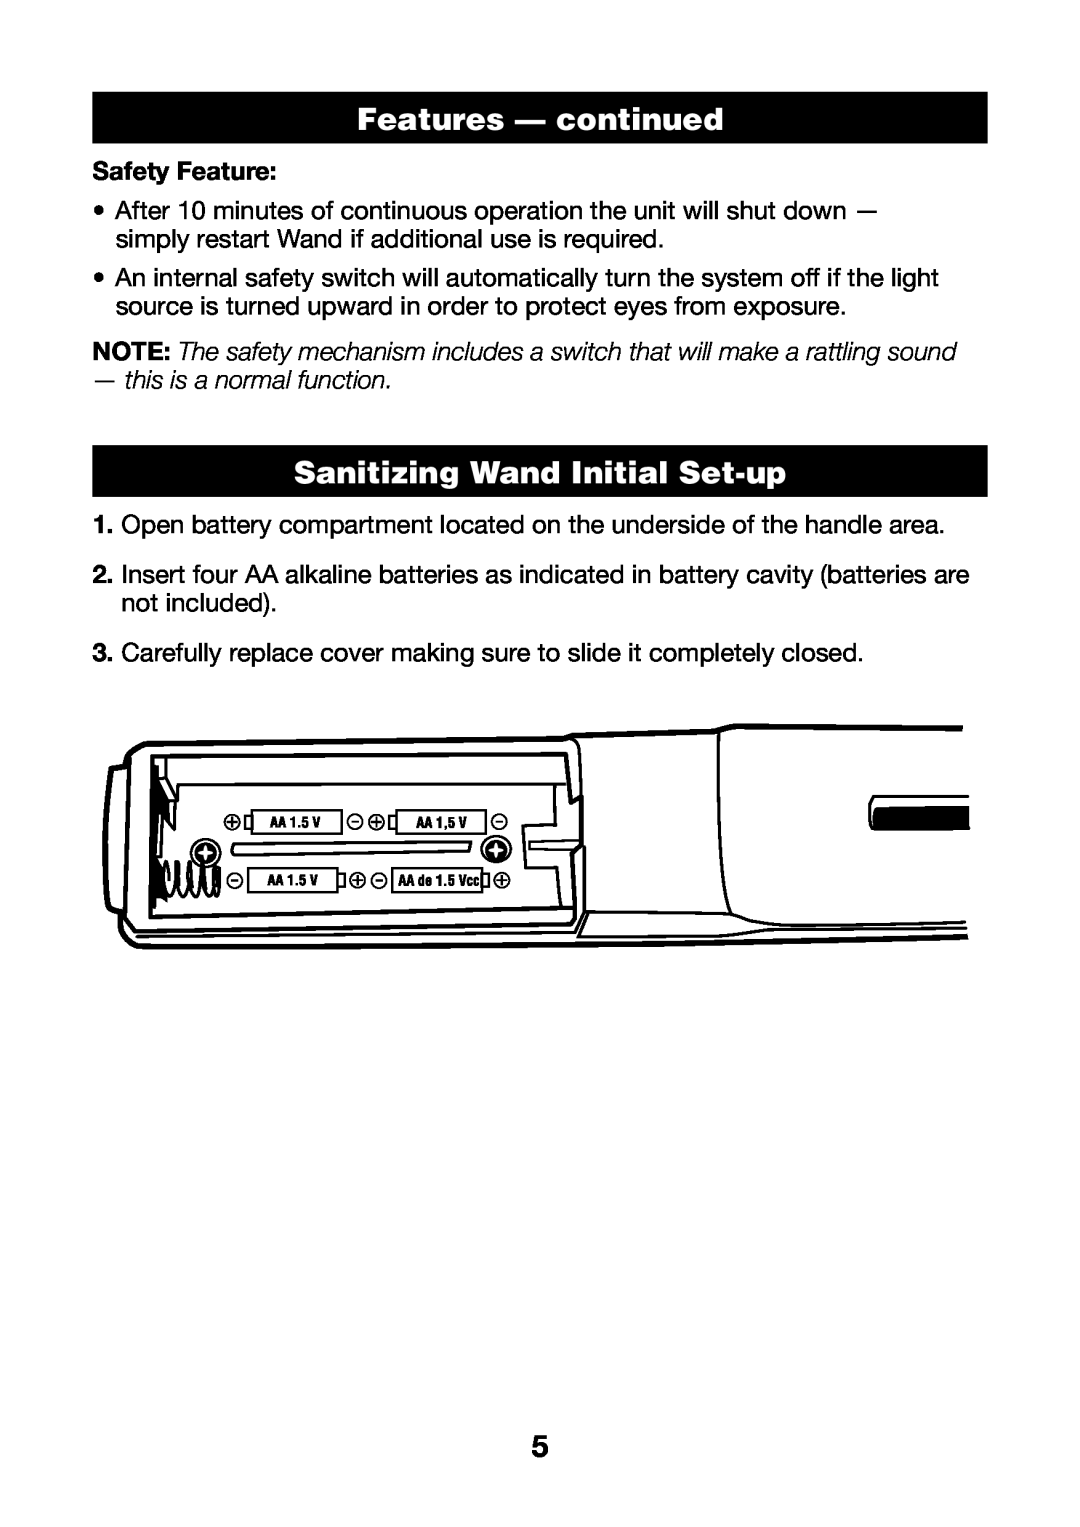 Verilux VH03 manual Features - continued, Sanitizing Wand Initial Set-up, Safety Feature, this is a normal function 